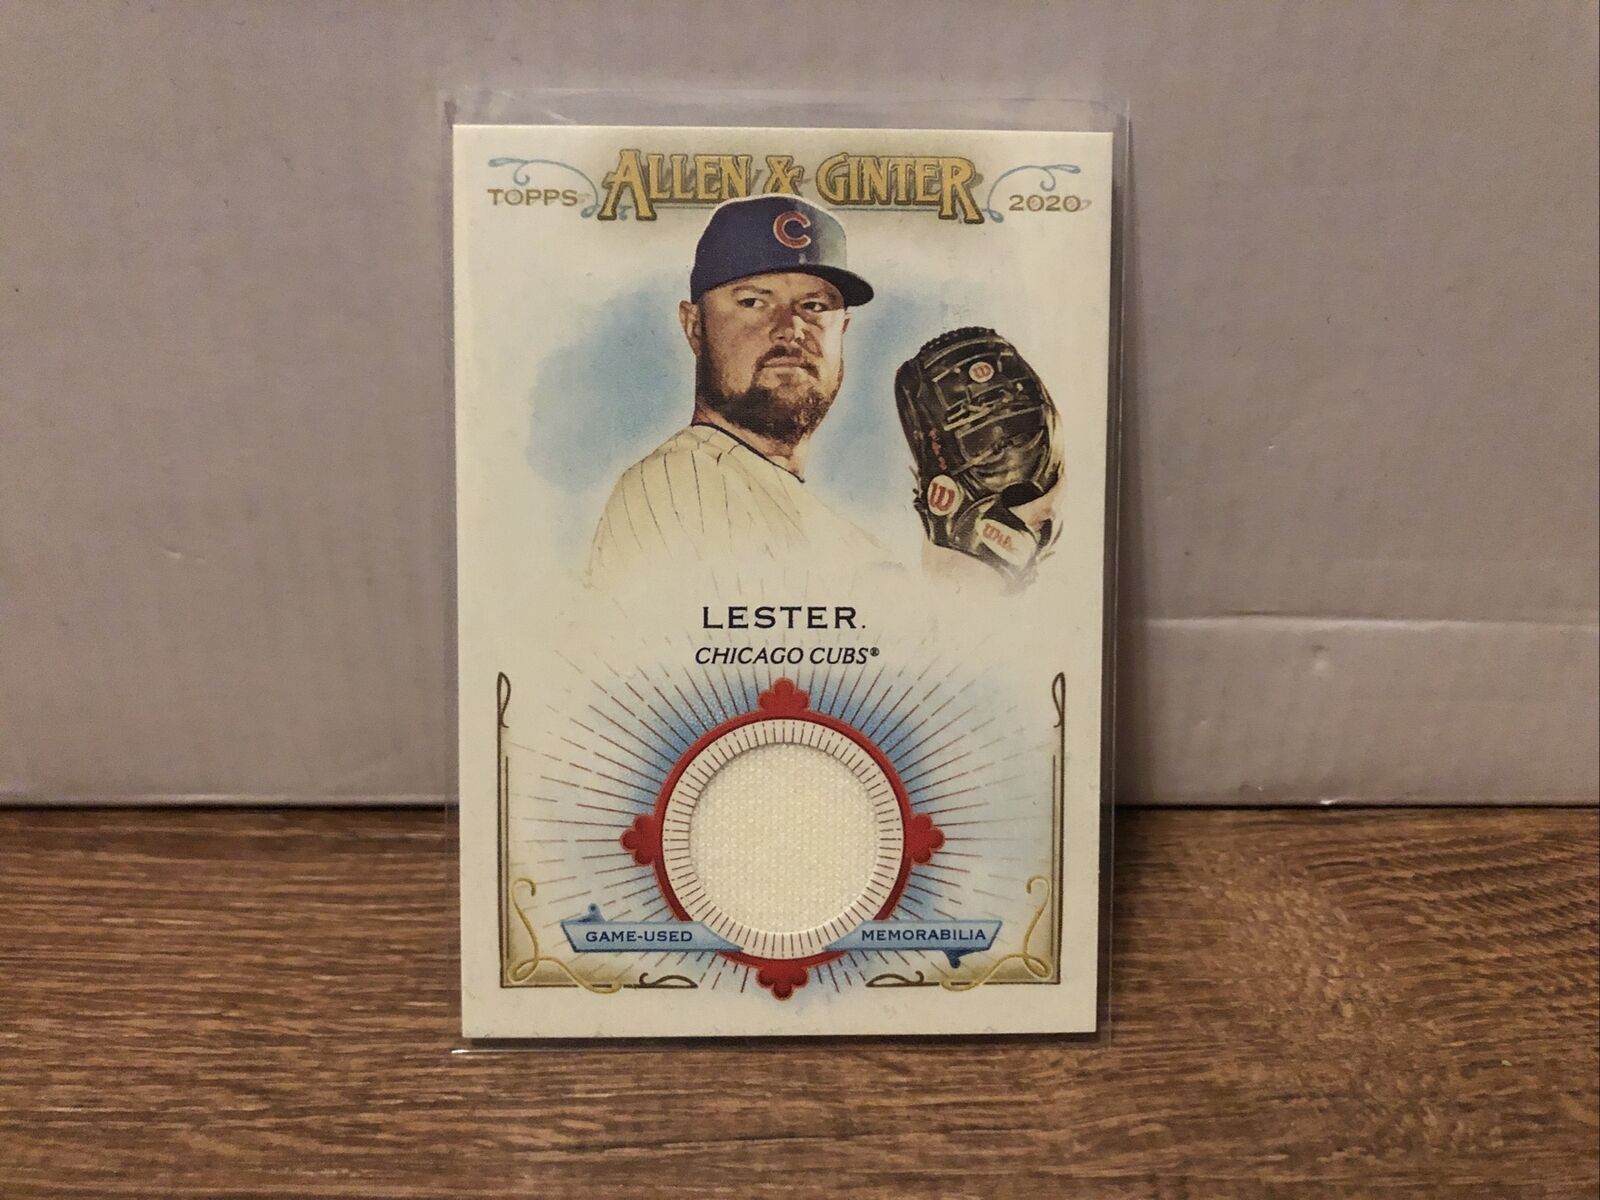 2020 topps allen & ginter Jon Lester  jersey patch relic Chicago Cubs